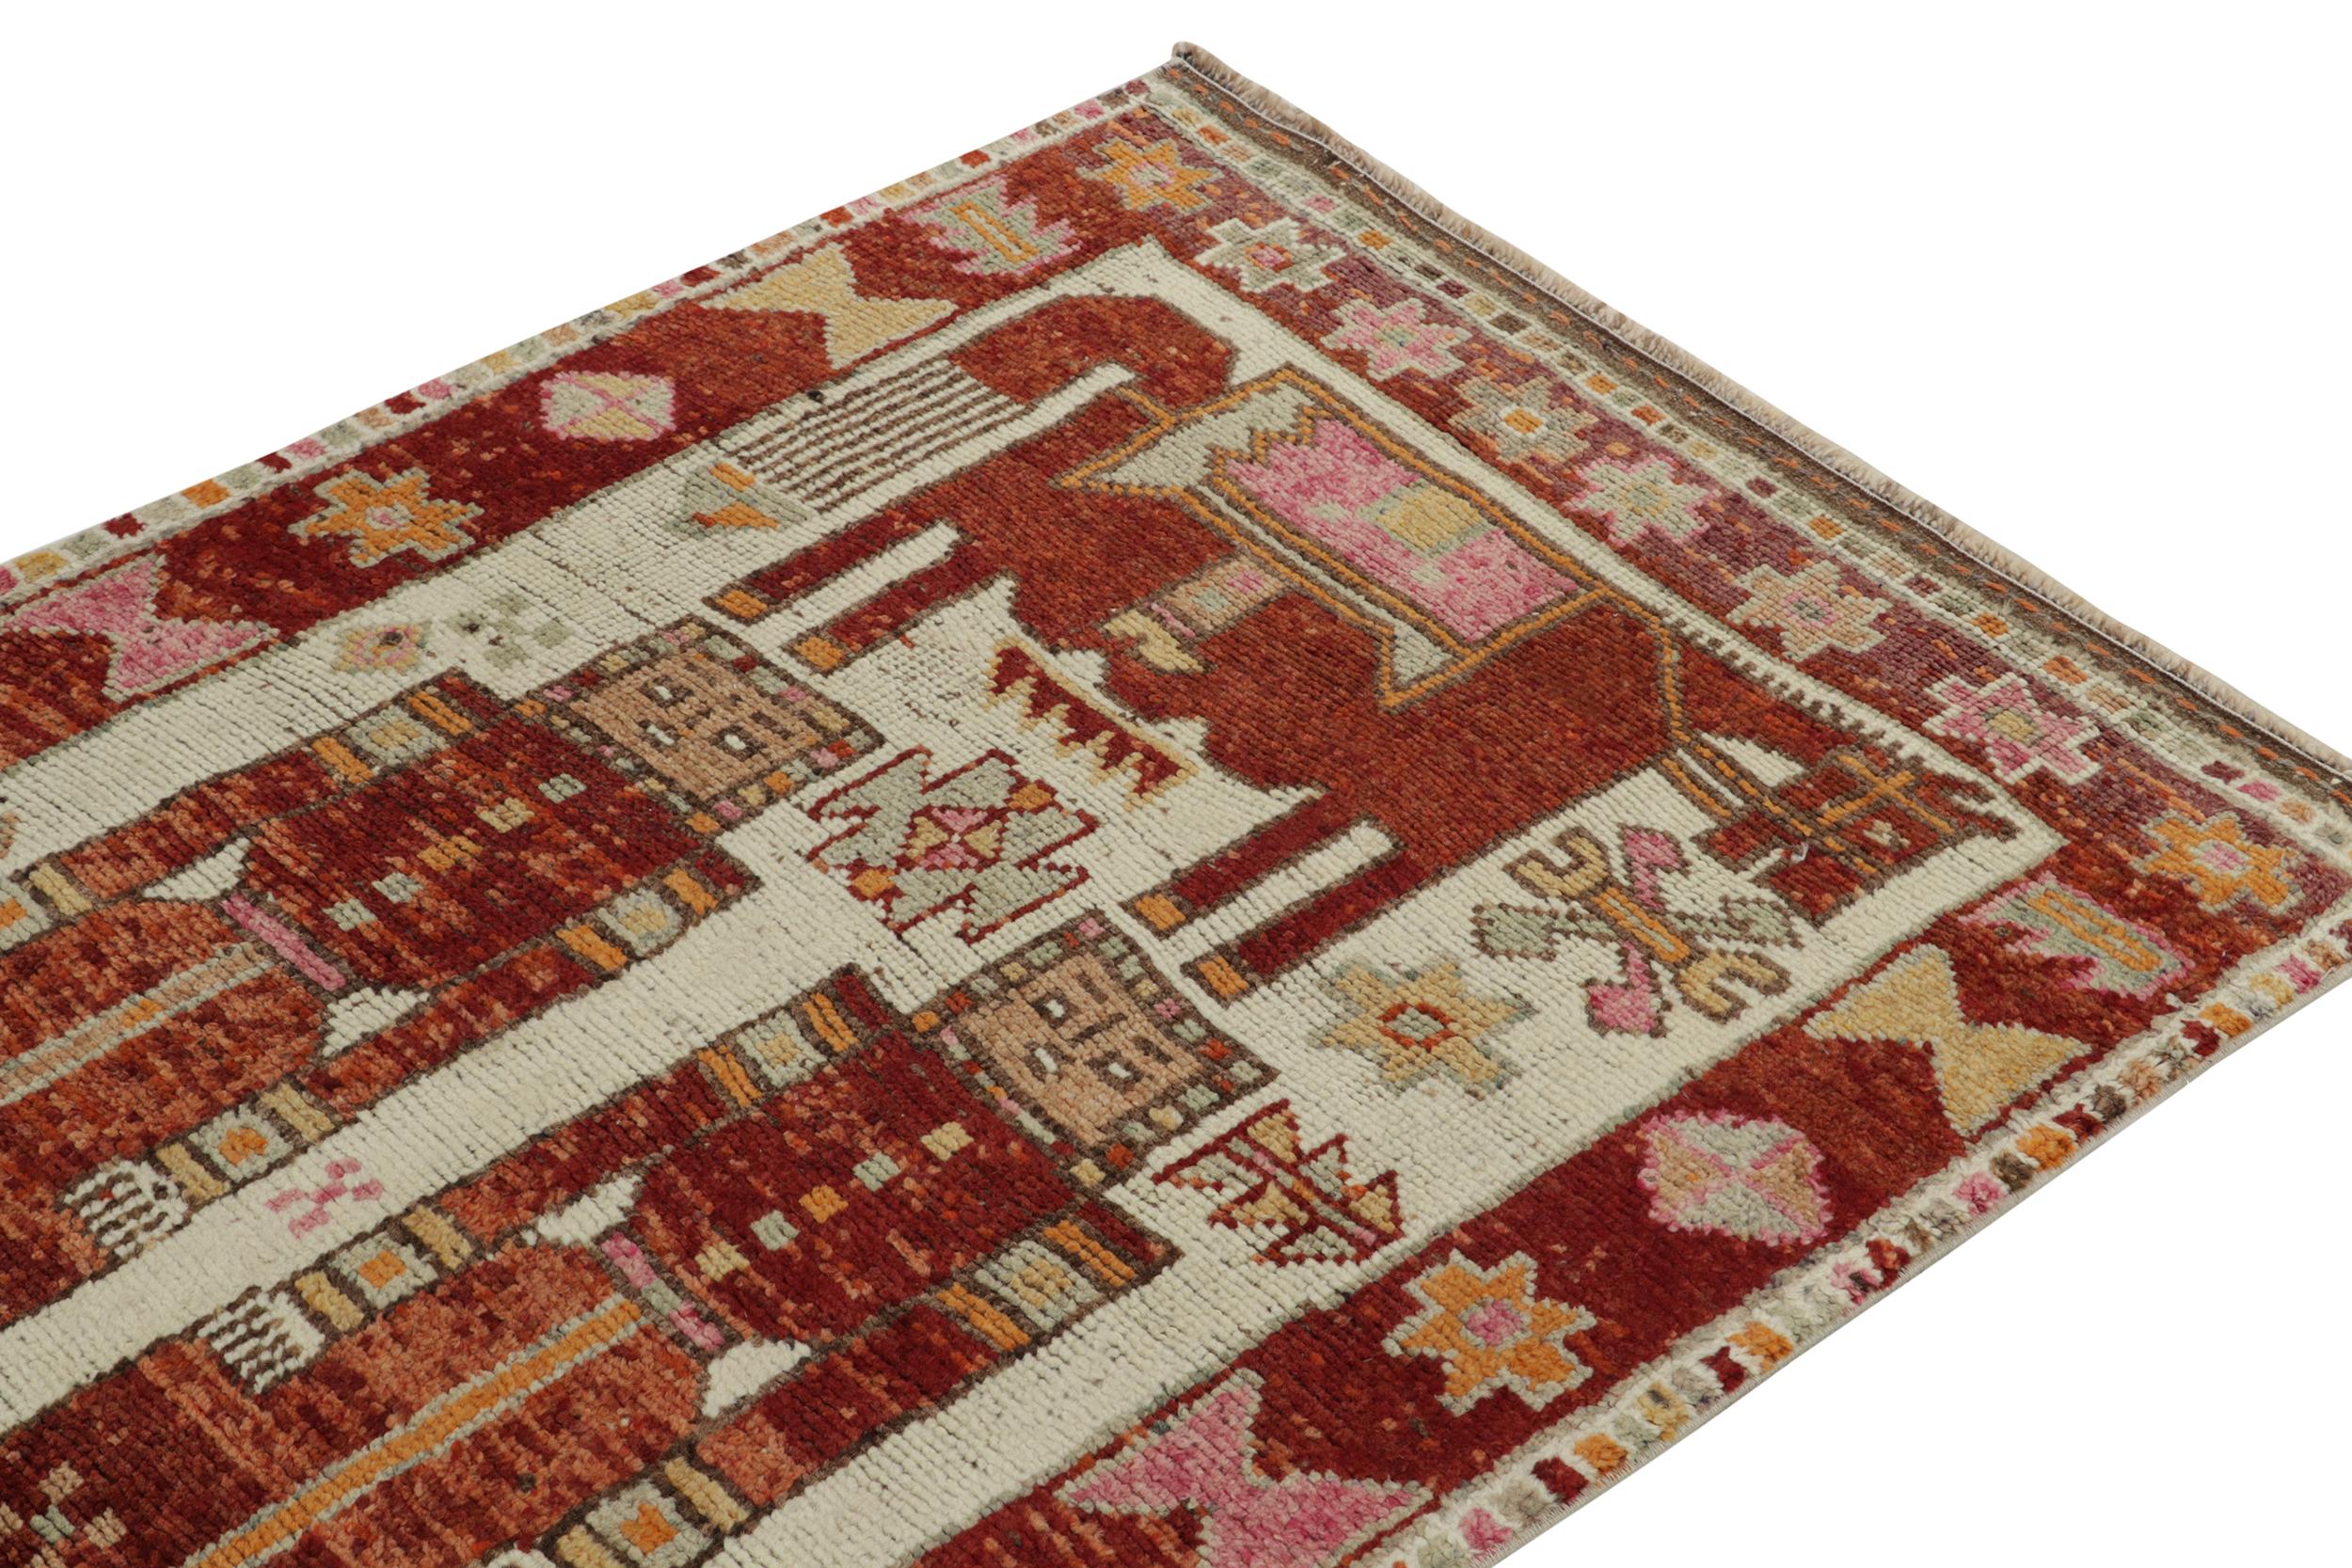 Hand-Knotted 1950s Vintage Tribal Rug in Red, Beige Pictorials Floral Pattern by Rug & Kilim For Sale